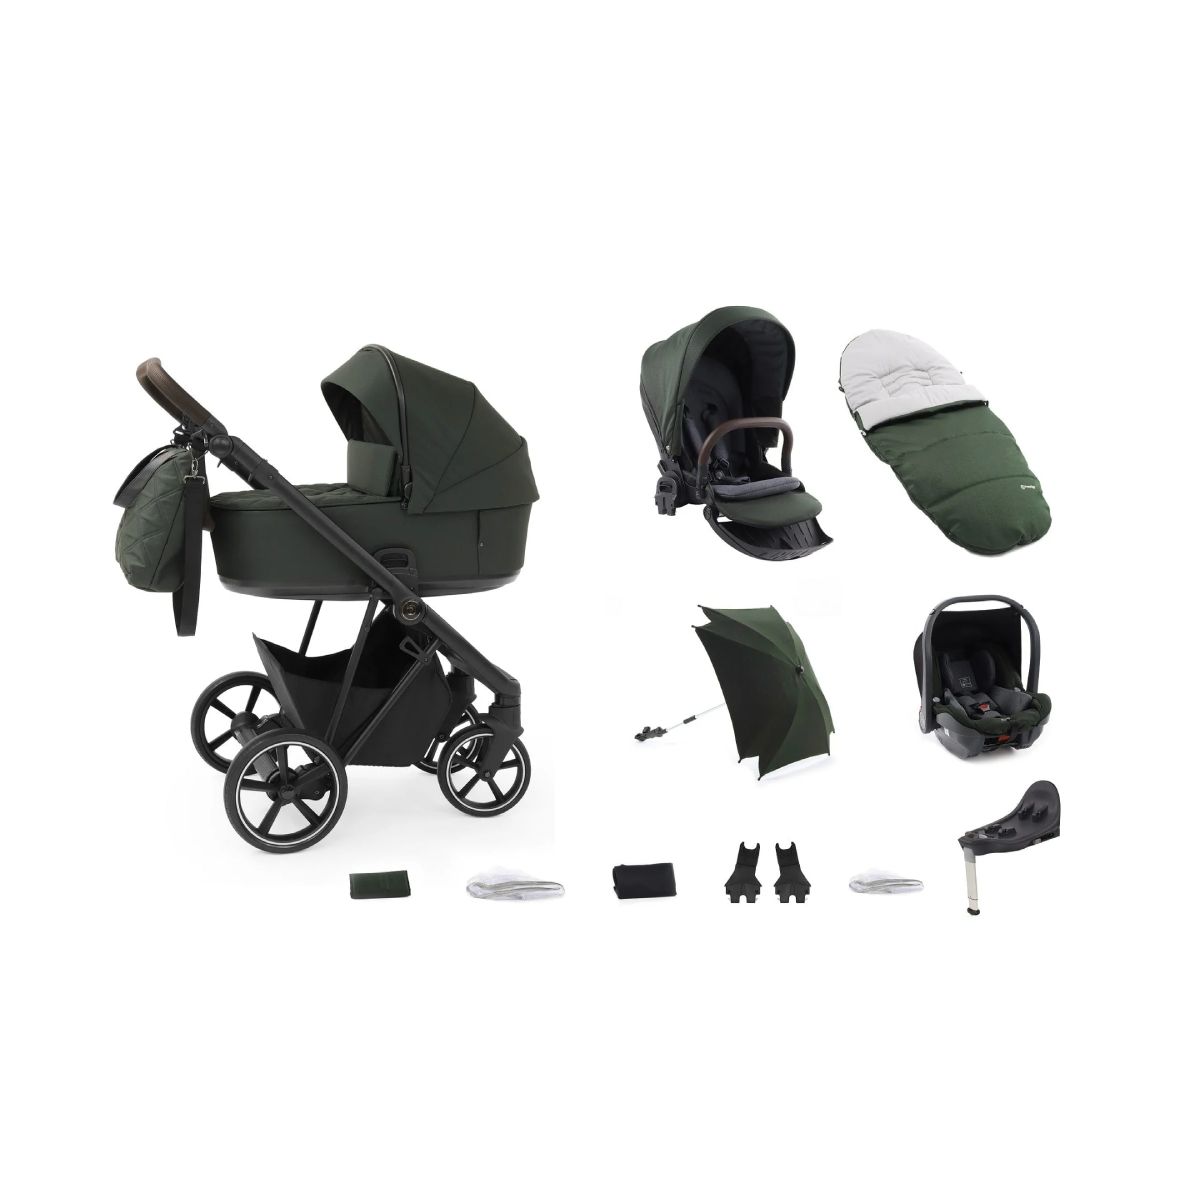 Babystyle Prestige with Vogue Chassis 13 Piece Bundle